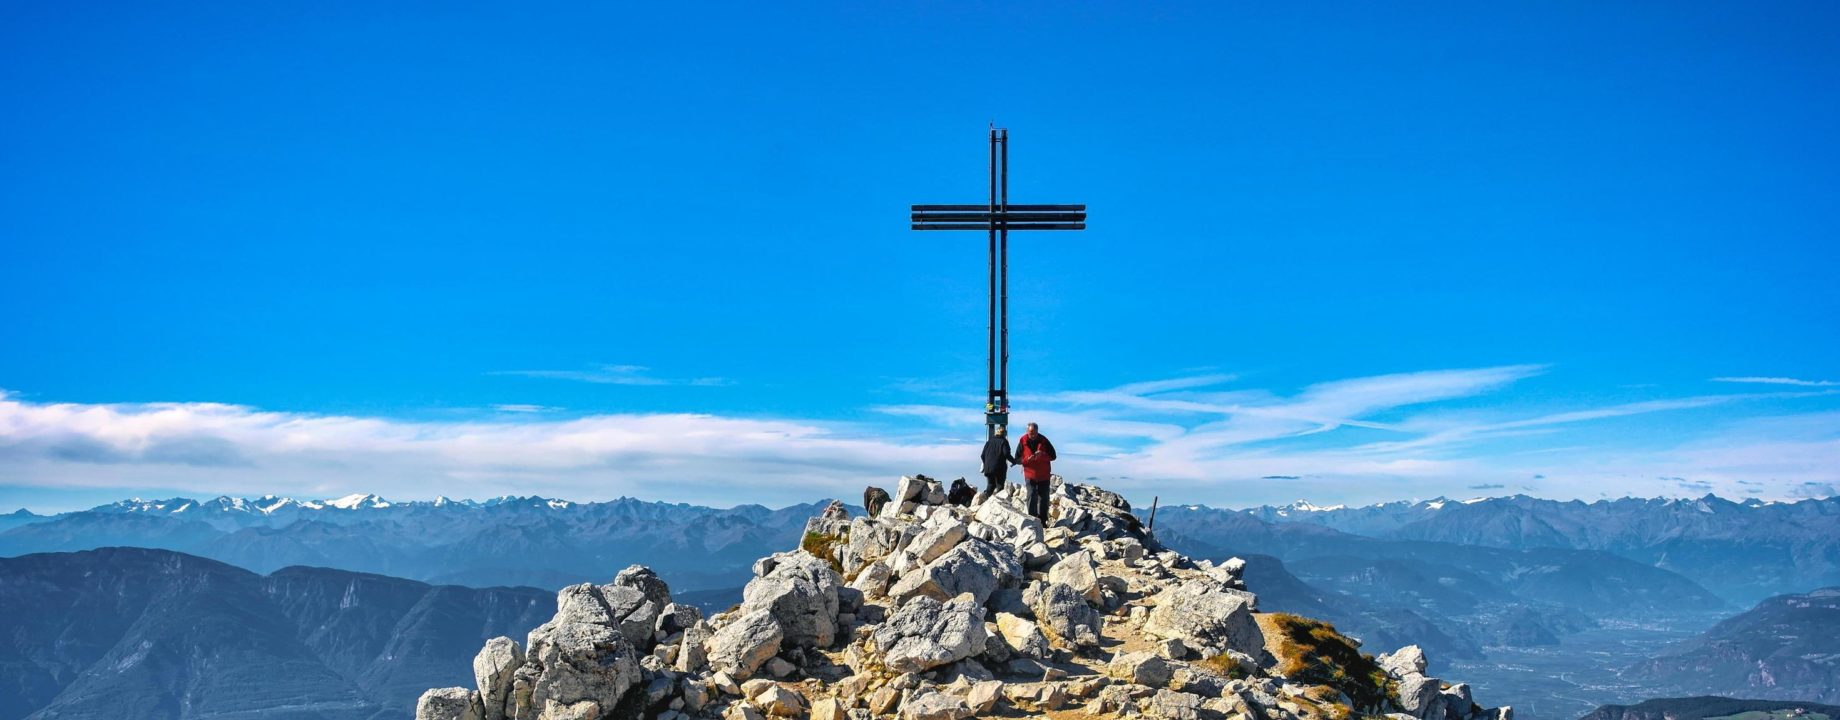 Weisshorn south tyrol italy 2017 mountain summit with cross free photo